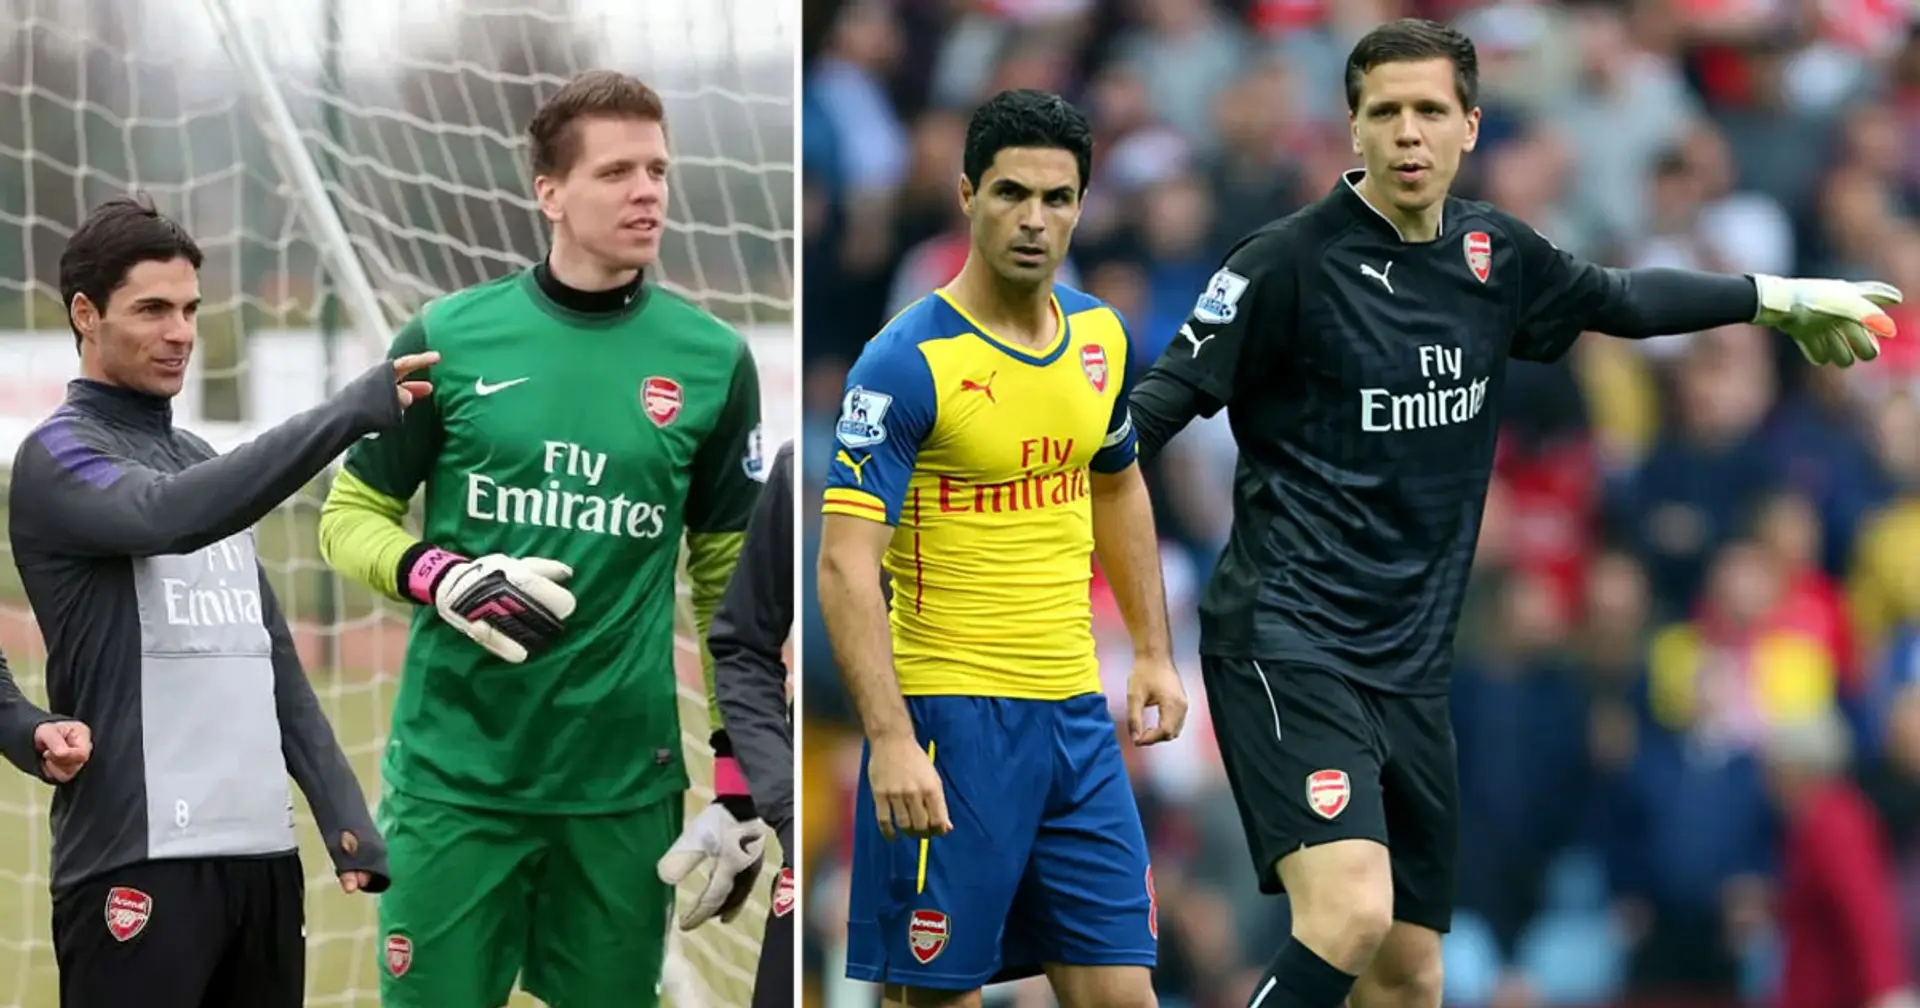 'I touched it and it was like a rock': Szczesny recalls hilarious Arsenal moment with Arteta